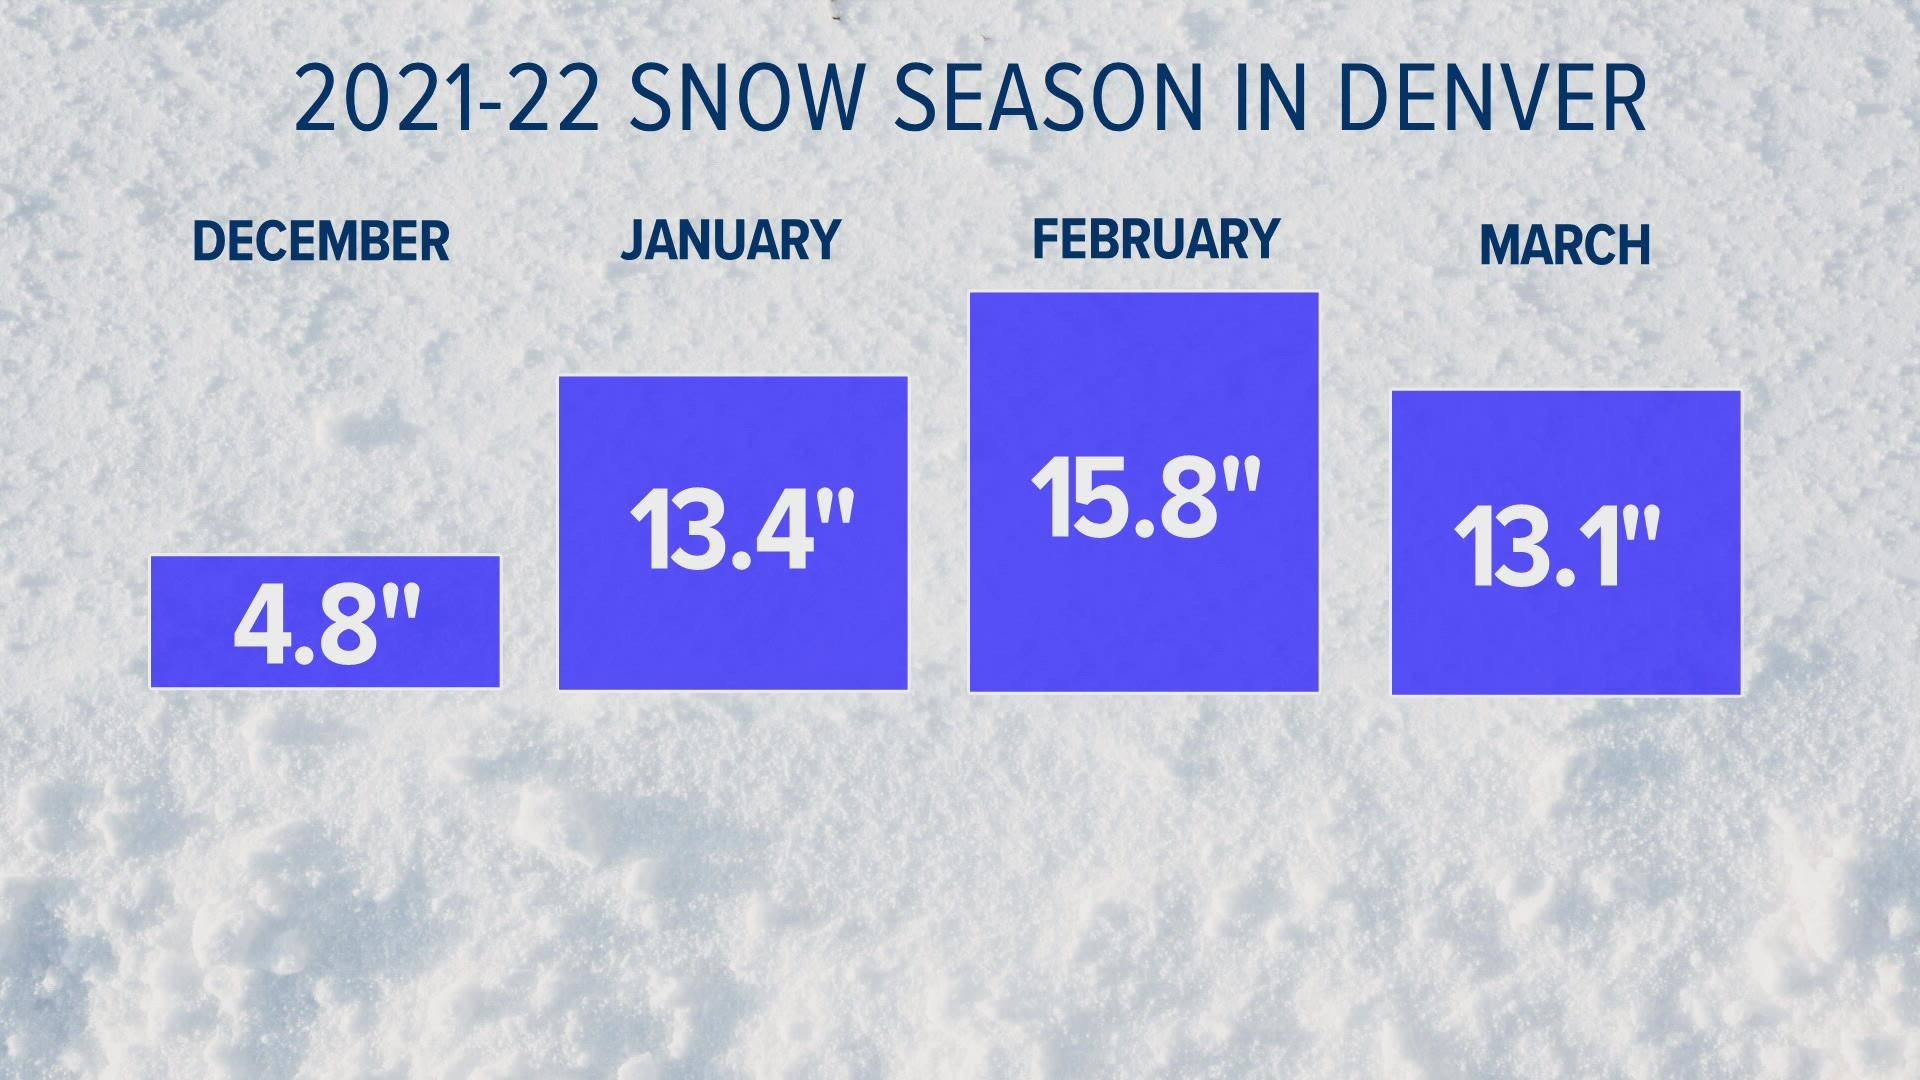 There is a chance the March 17 snow accumulation in Denver might be the last of the season. That would make it the shortest snow season in history.